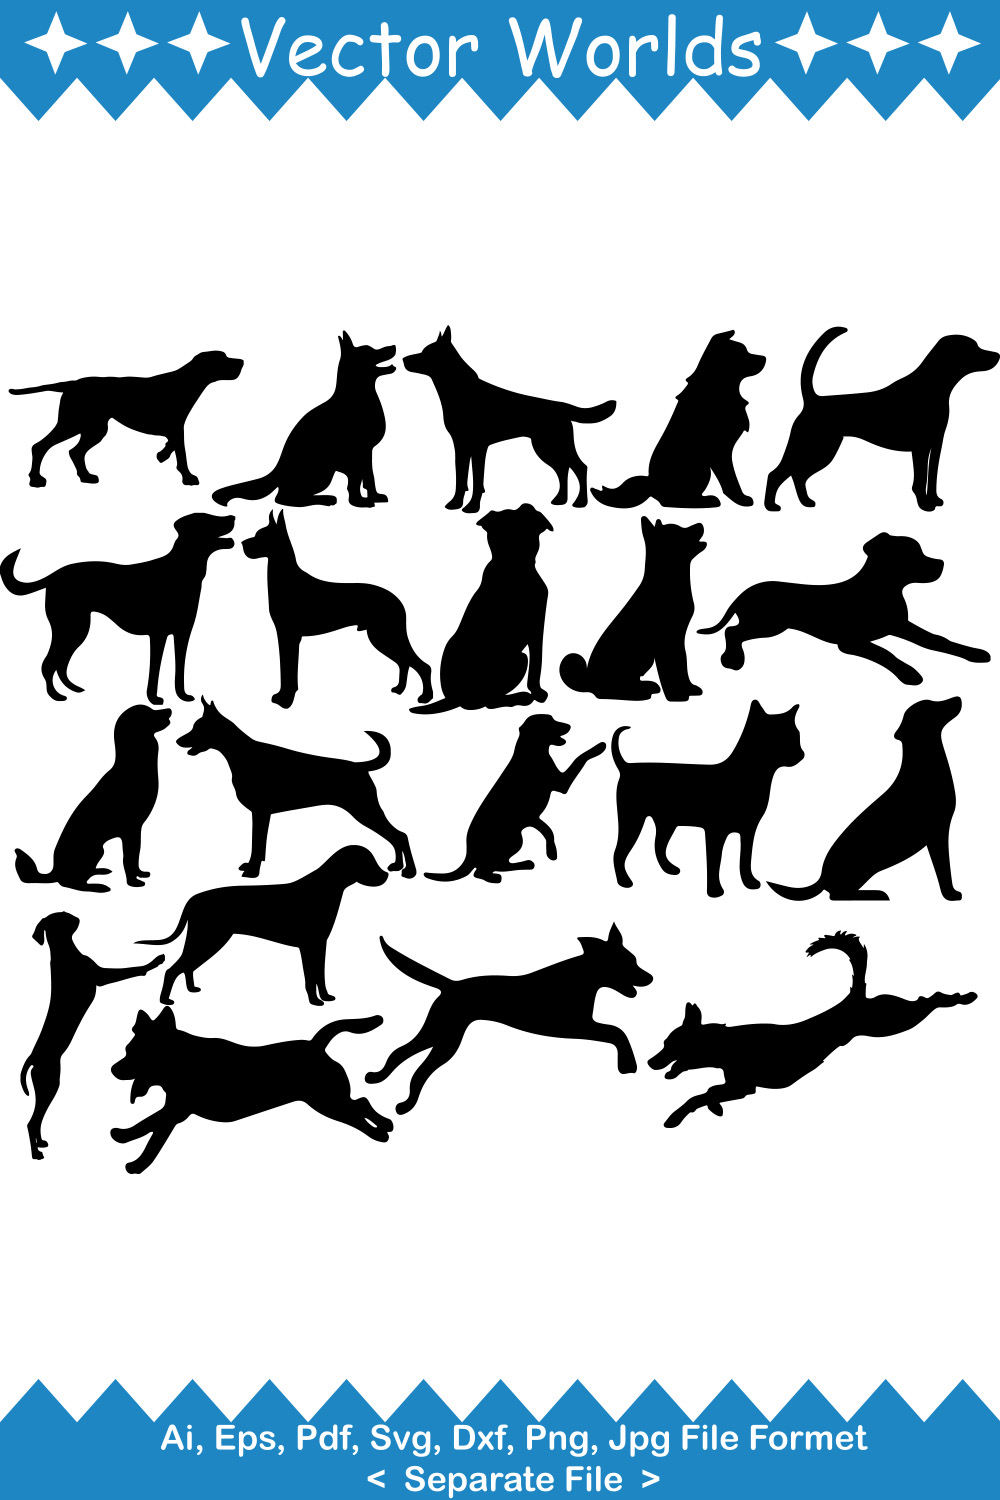 Large set of dog silhouettes on a white background.